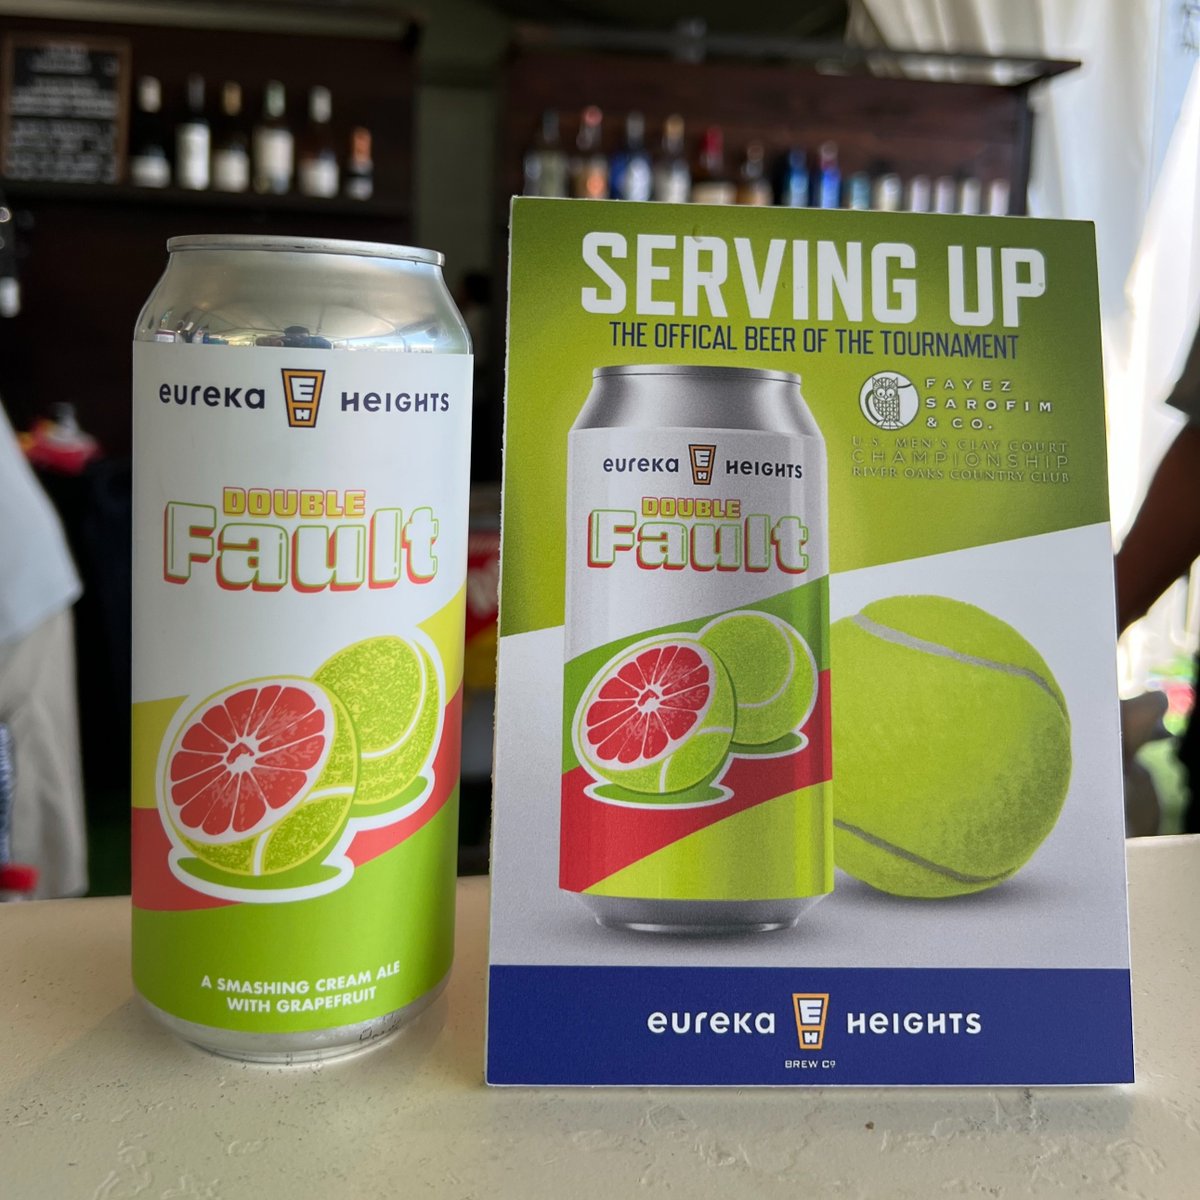 Double Fault is back and ready to rally with your tastebuds at the U.S. @mensclaycourt Championship Tennis Tournament. This glorious Cream Ale is packed full of Texas grapefruit. This year it's only available at the tournament starting today through April 7th.